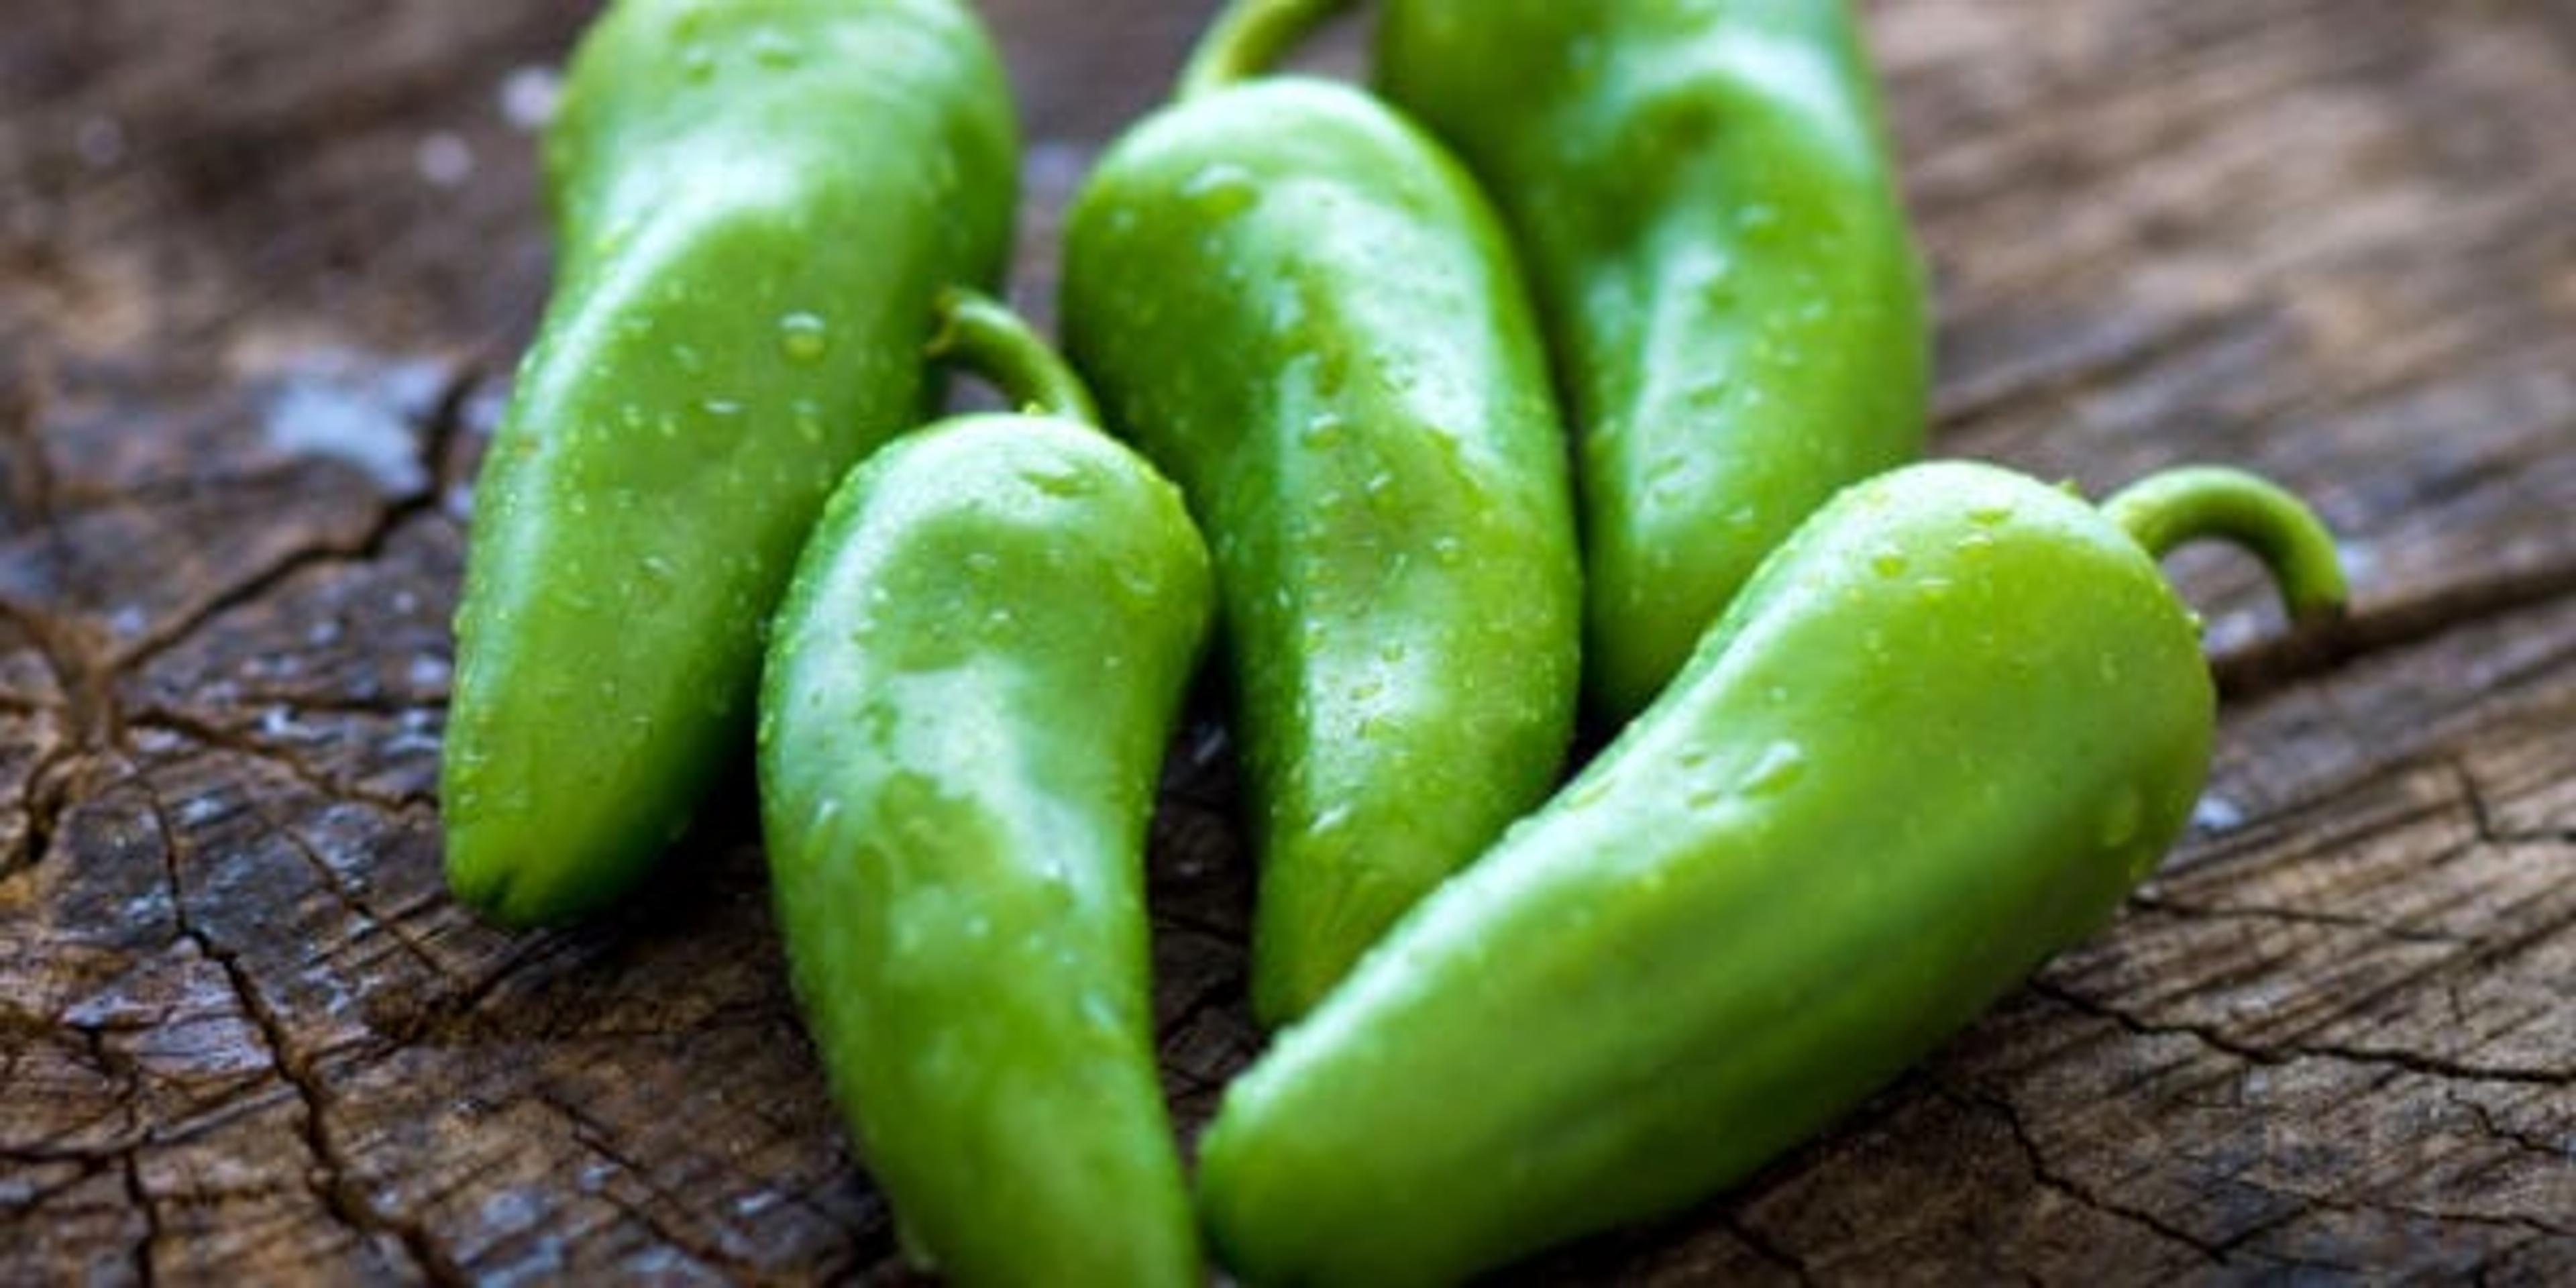 image of jalapeno peppers